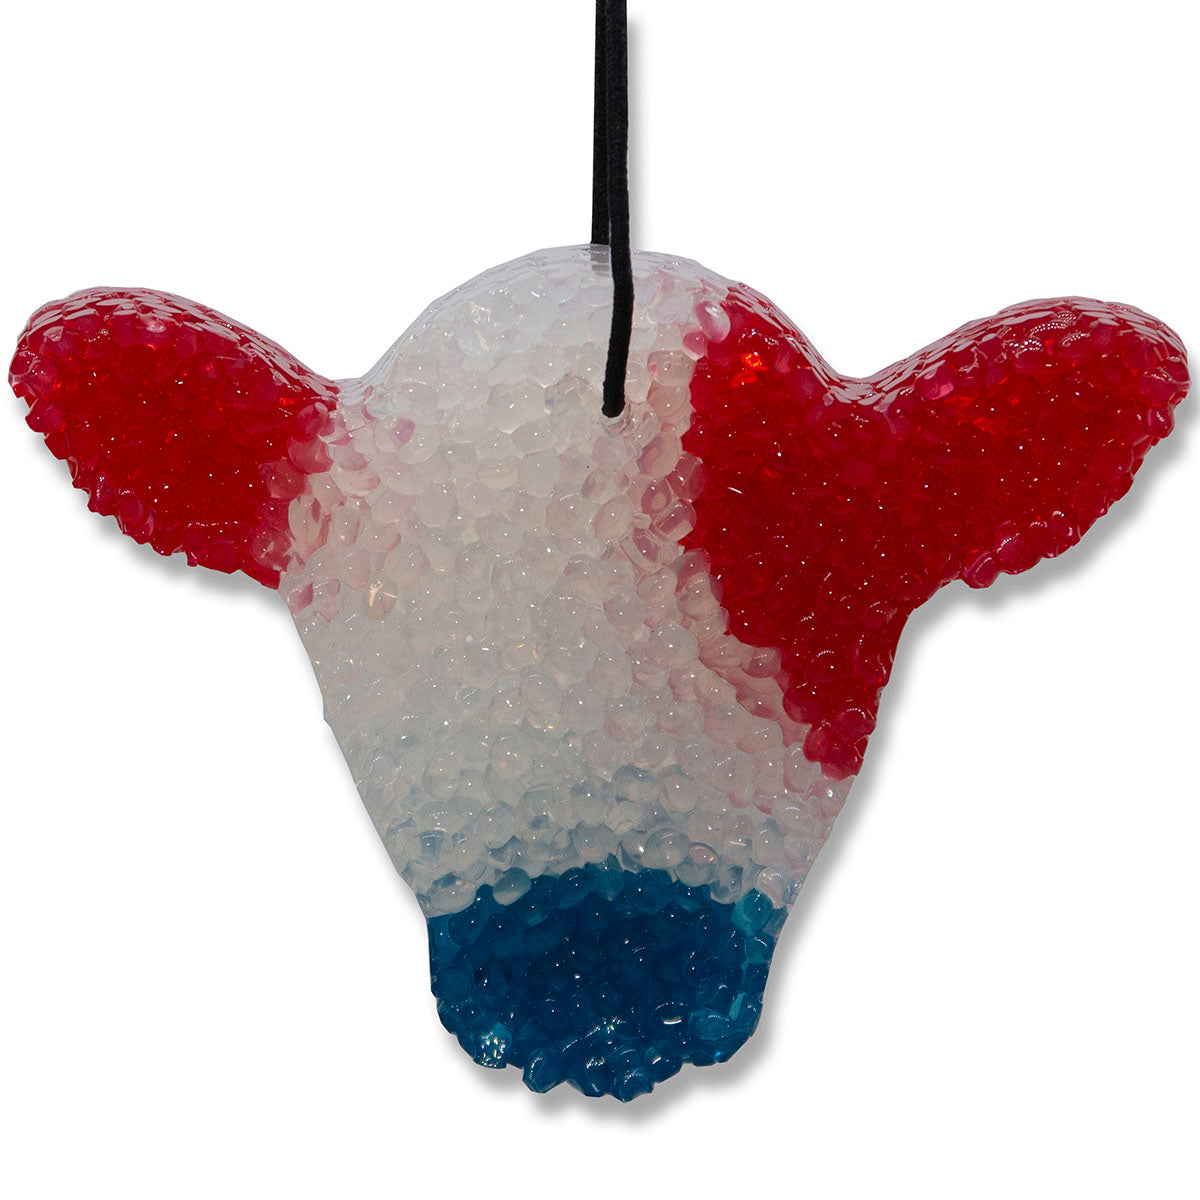 Leather, Lone Star Candles & More’s Premium Strongly Scented Freshies, Authentic Aroma of Genuine Leather, Car & Air Freshener, USA Made in Texas, Red, White & Blue Cute Cow Face 1-Pack